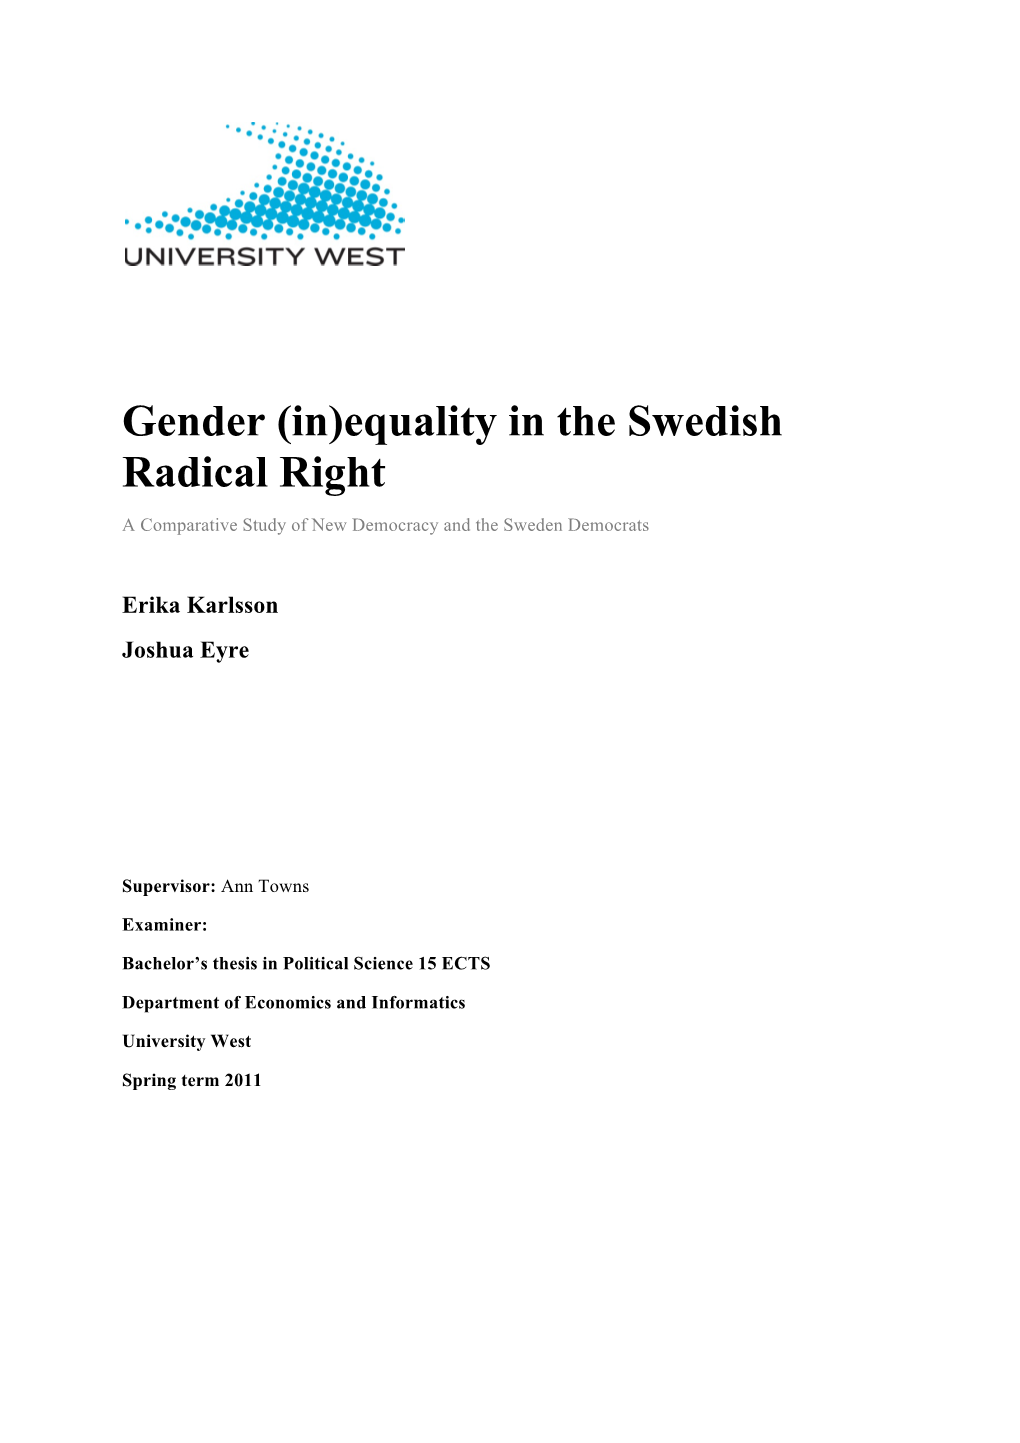 Gender (In)Equality in the Swedish Radical Right